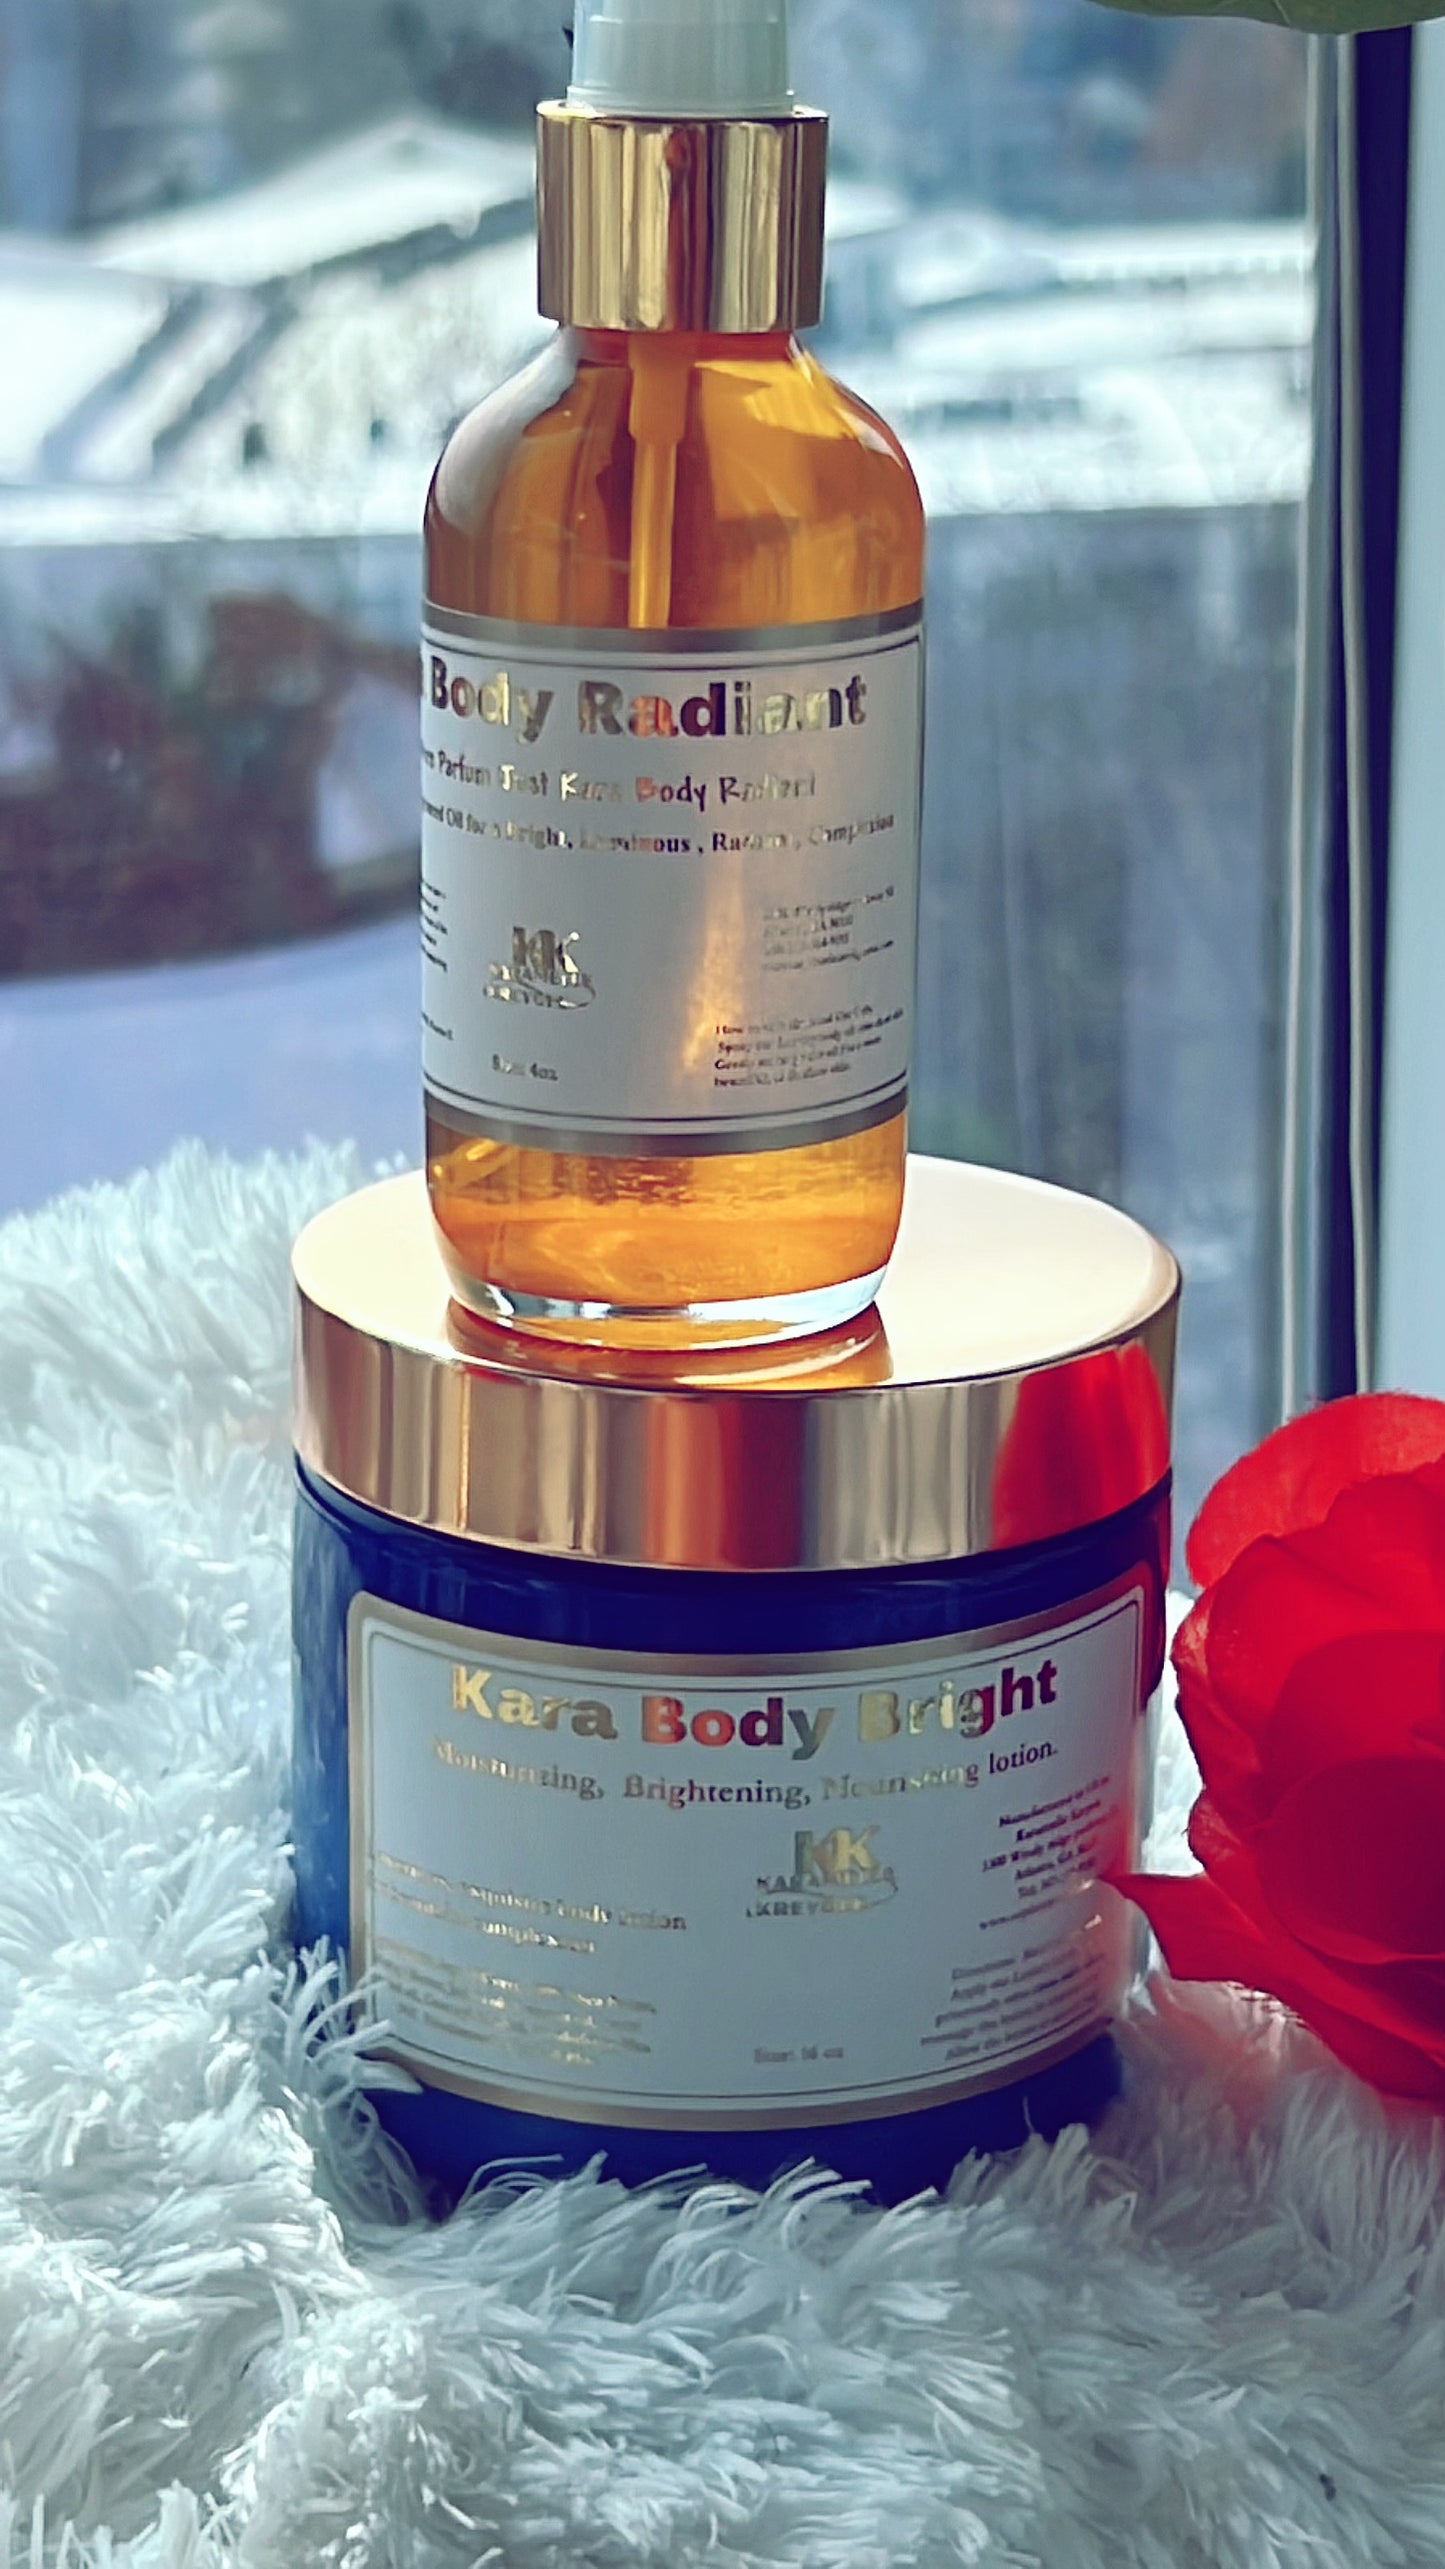 Introducing our Radiant Elegance Collection – Kara Body Bright, Body lotion & Kara Body Radiant; Body oil